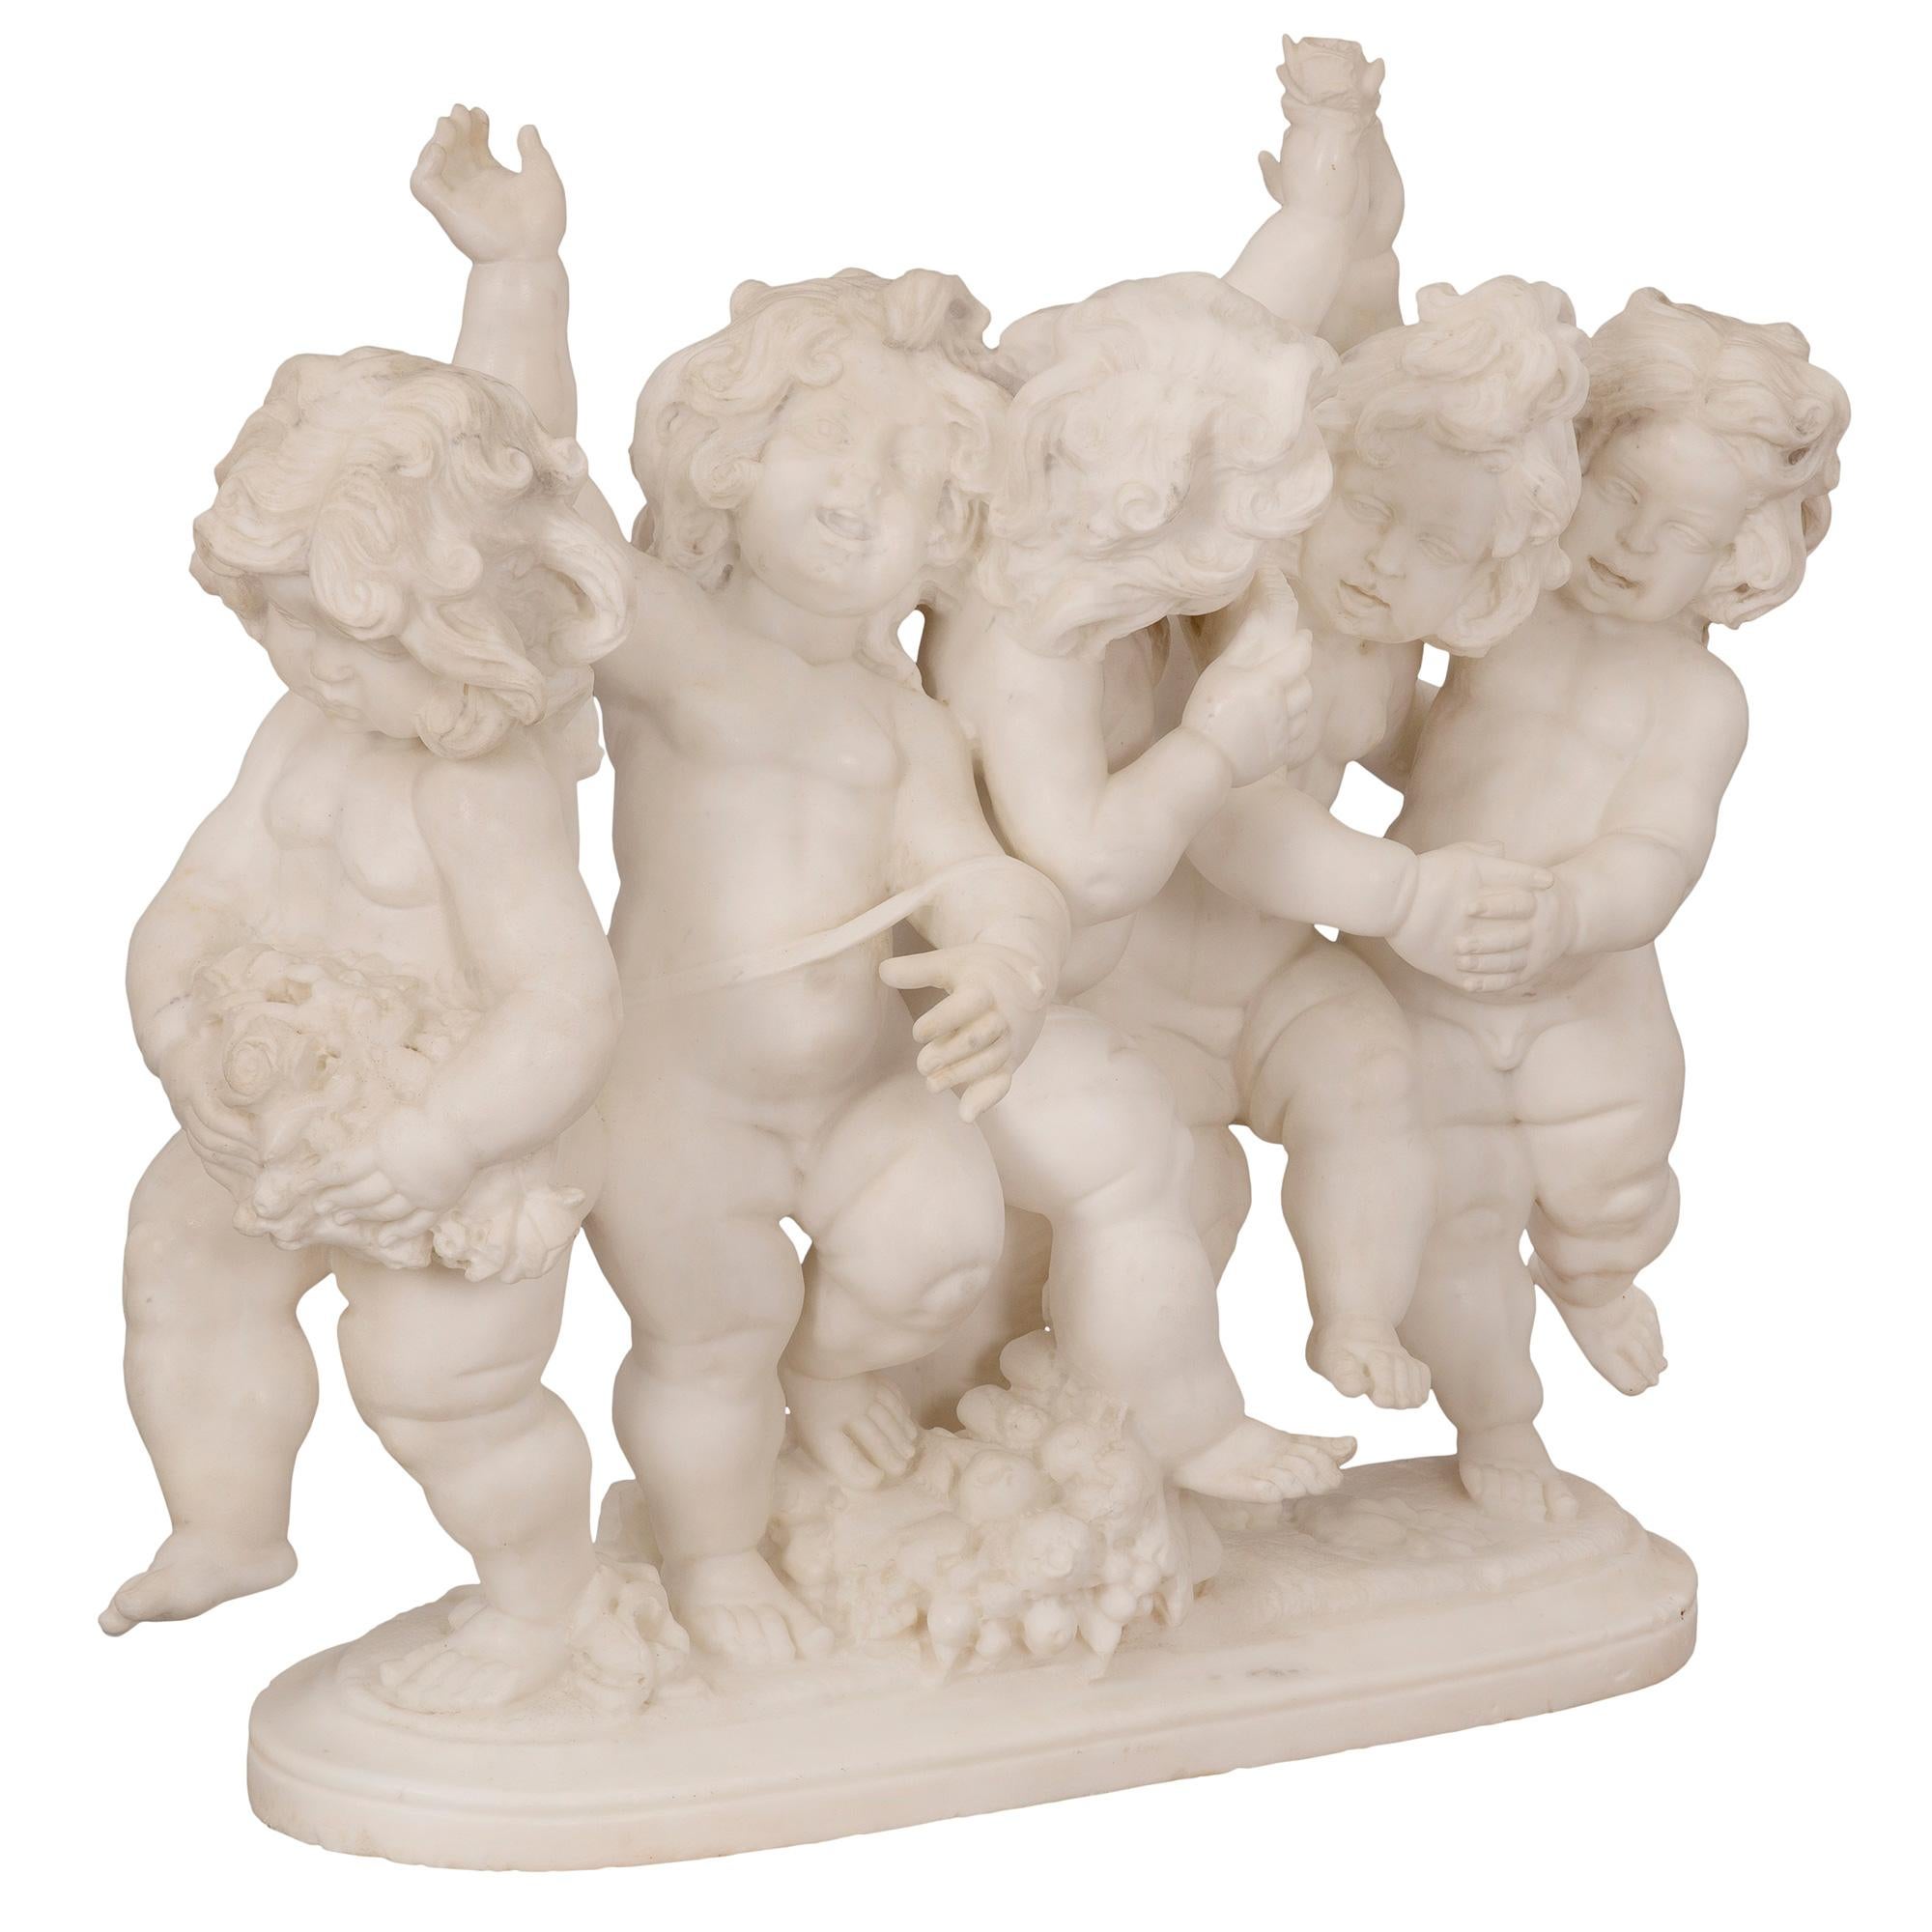 A sensational and high-quality Italian 19th century Louis XVI st. white Carrara marble statue. The statue is raised by an oblong base with a fine wrap around mottled border. Above are five most charming and richly sculpted cherubs who are joyfully